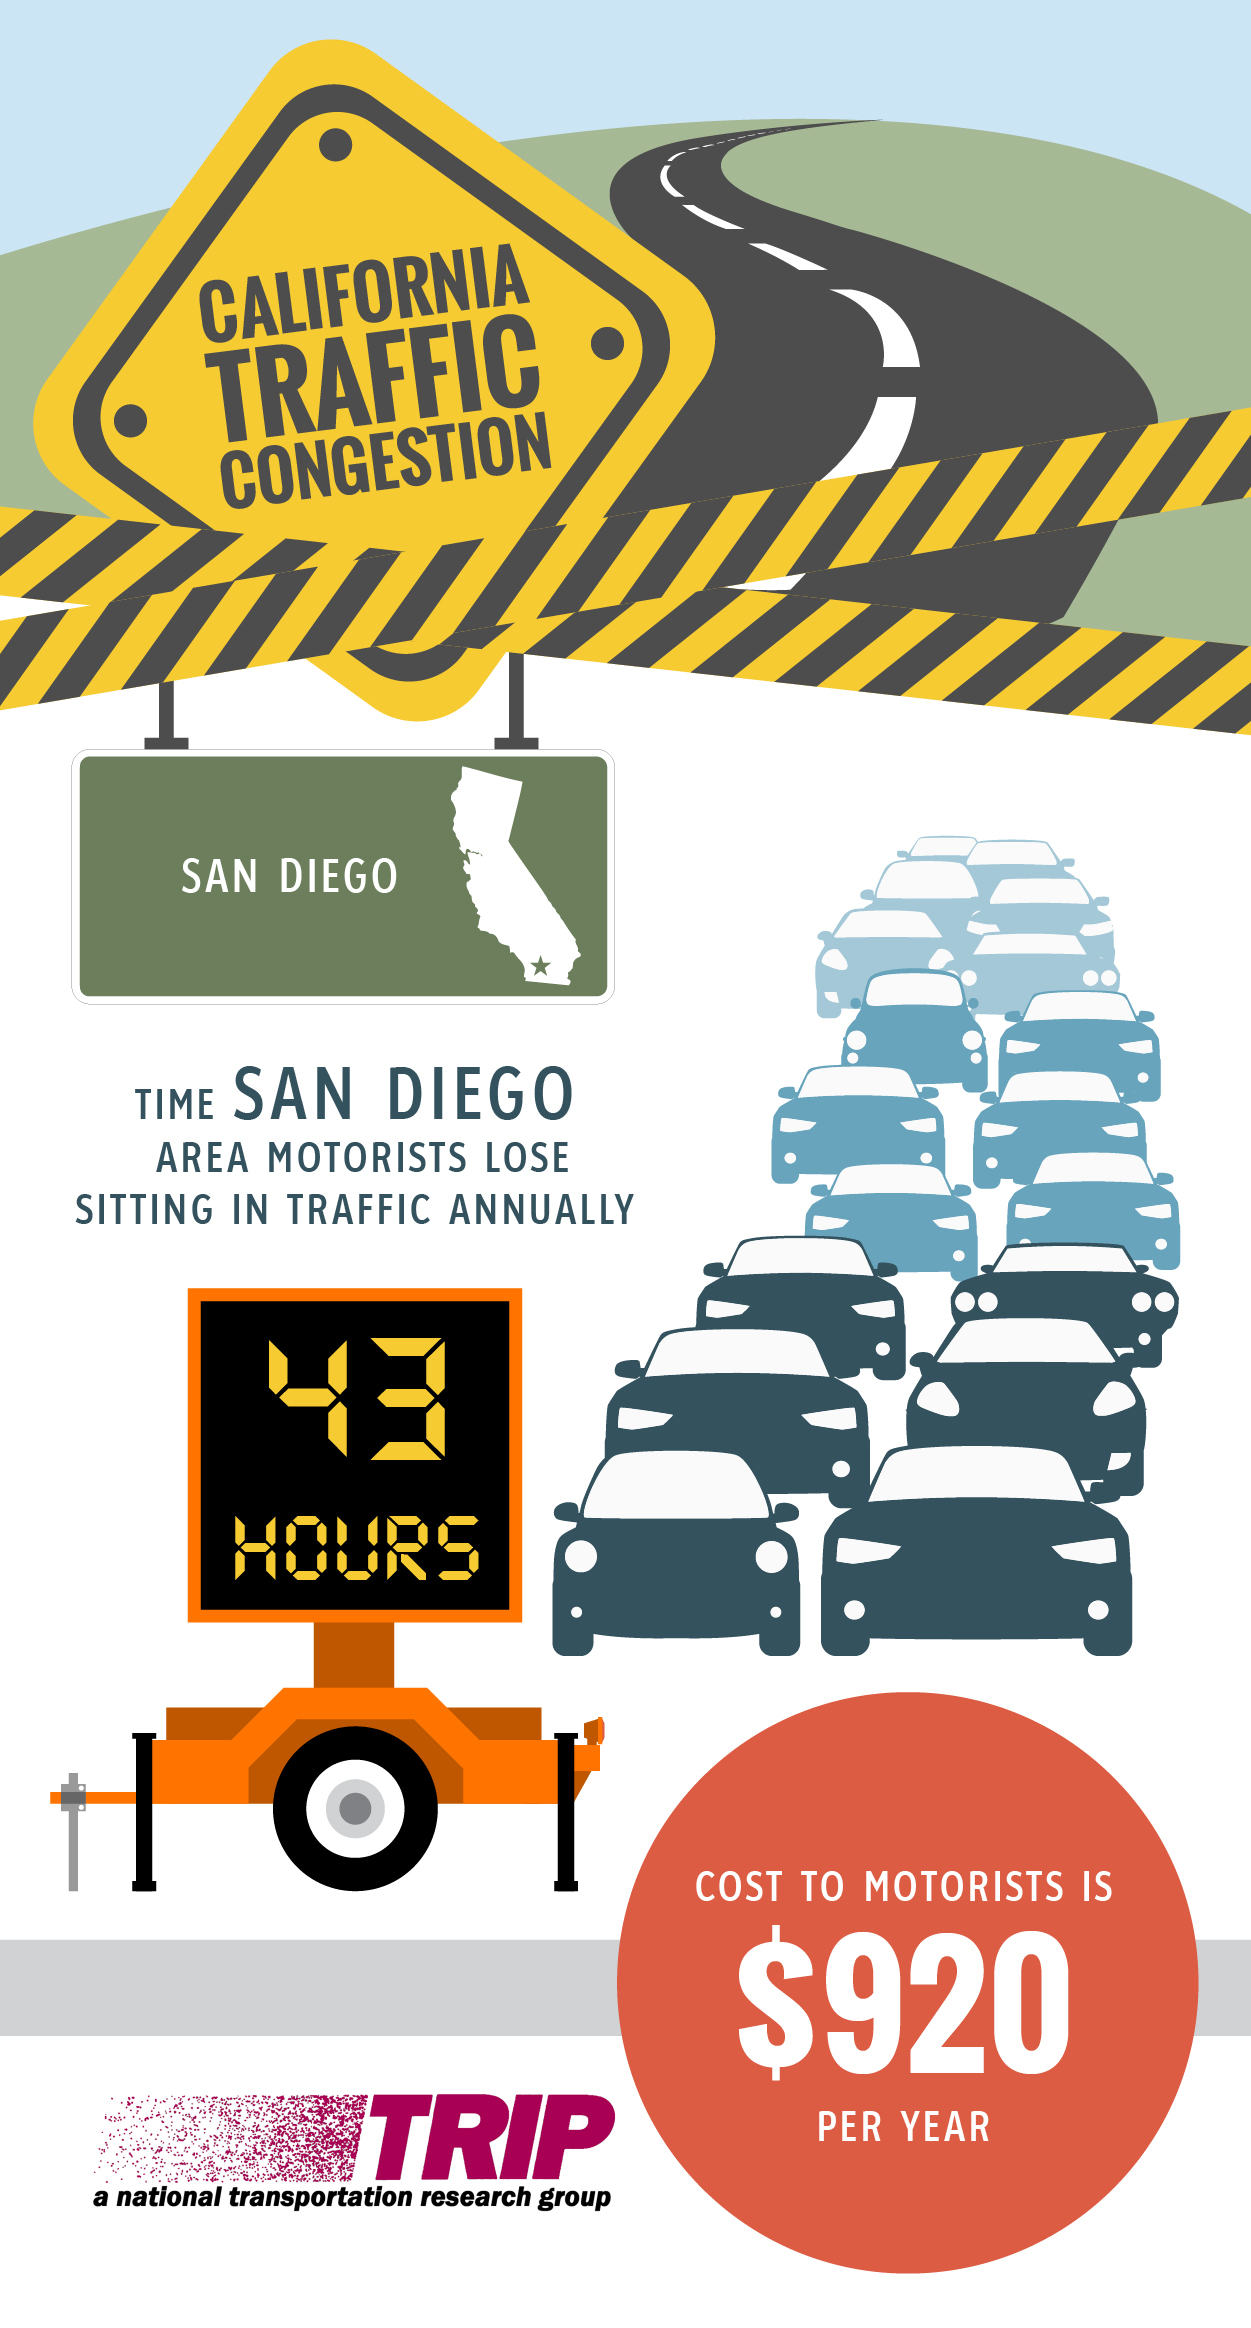 San Diego Congestion Infographic